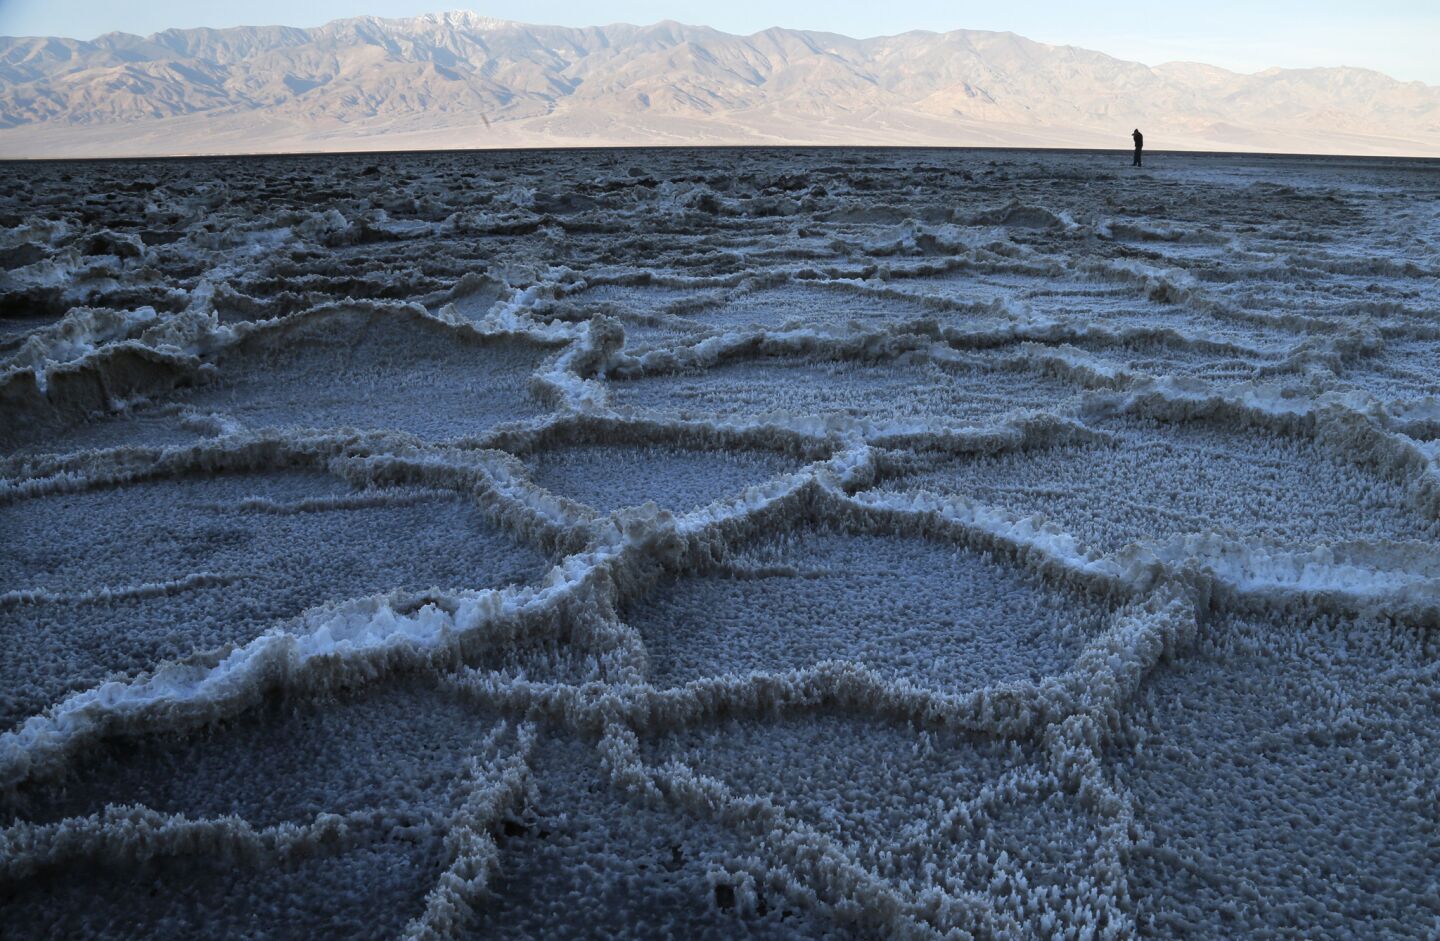 Unique salt structures form in the Badwater Basin, where water combines with the natural salt deposits at 282 feet below sea level.